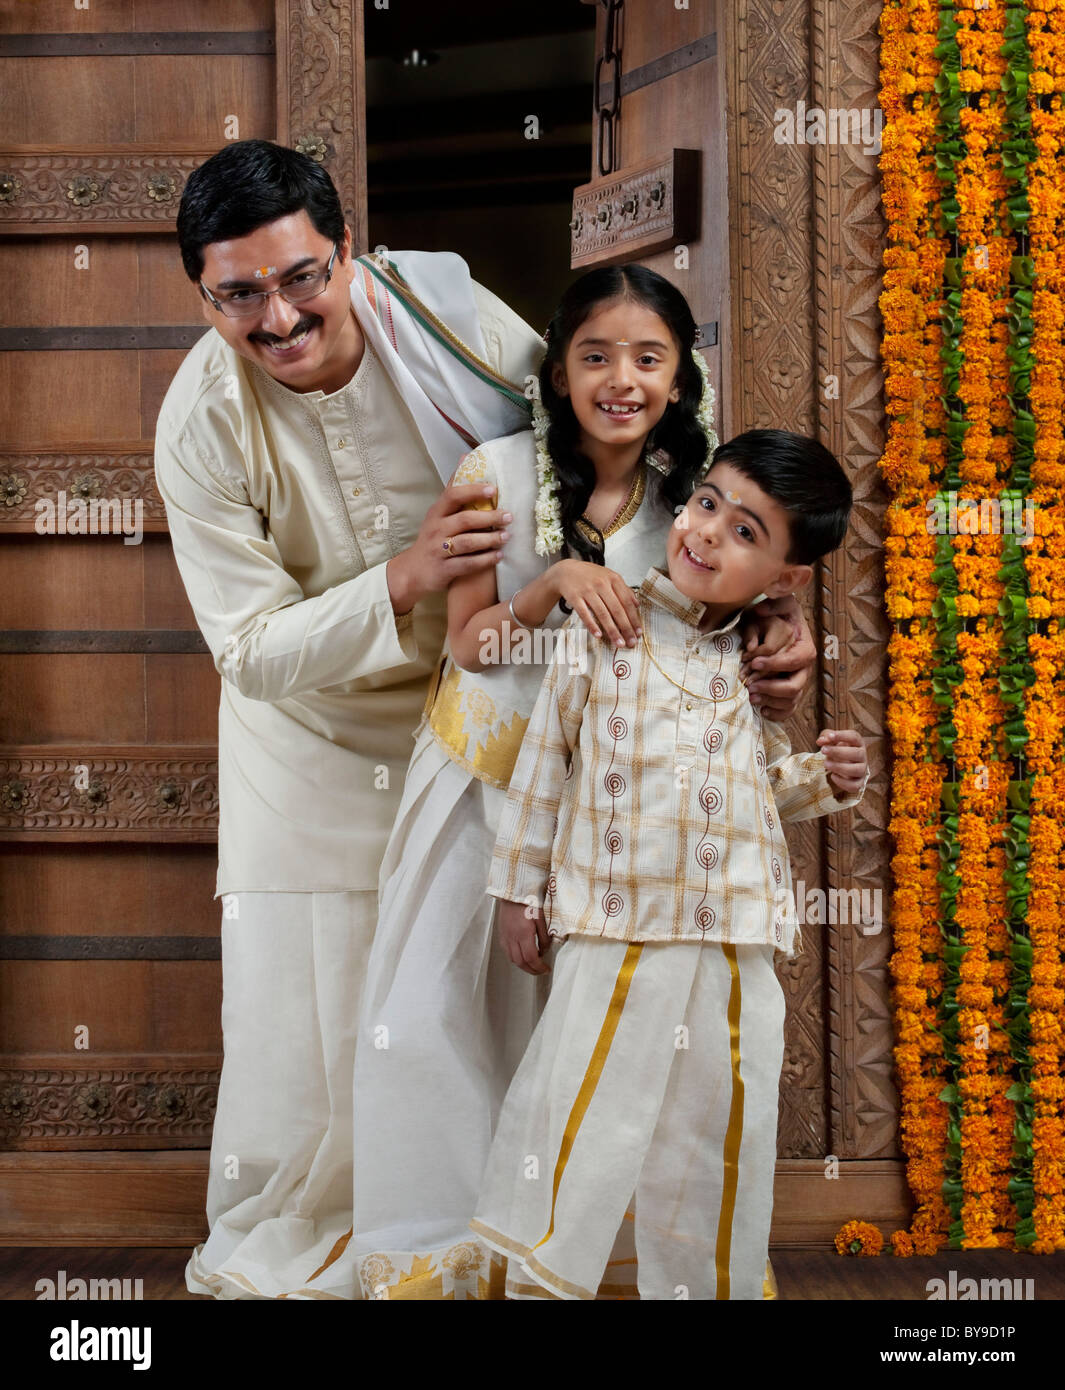 Live life: A Happy Indian Family Portrait - Mudframes PicturesMudframes  Pictures